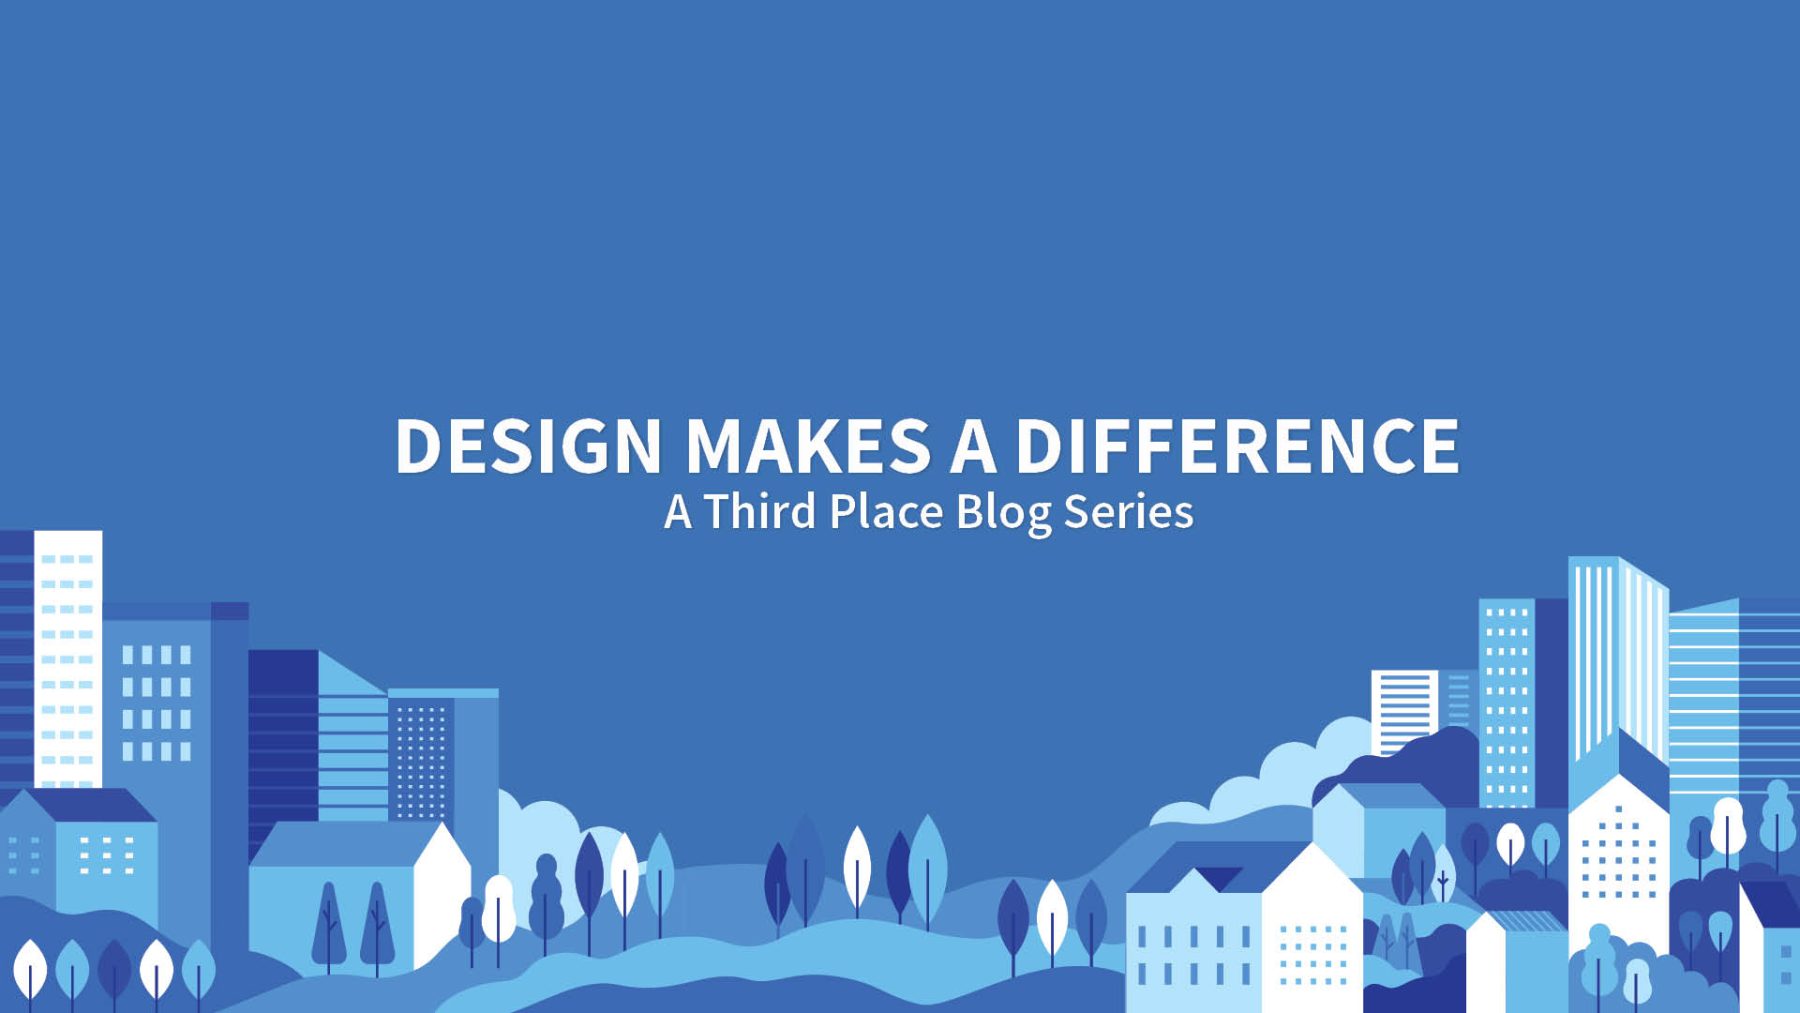 design makes a difference: a third place blog series